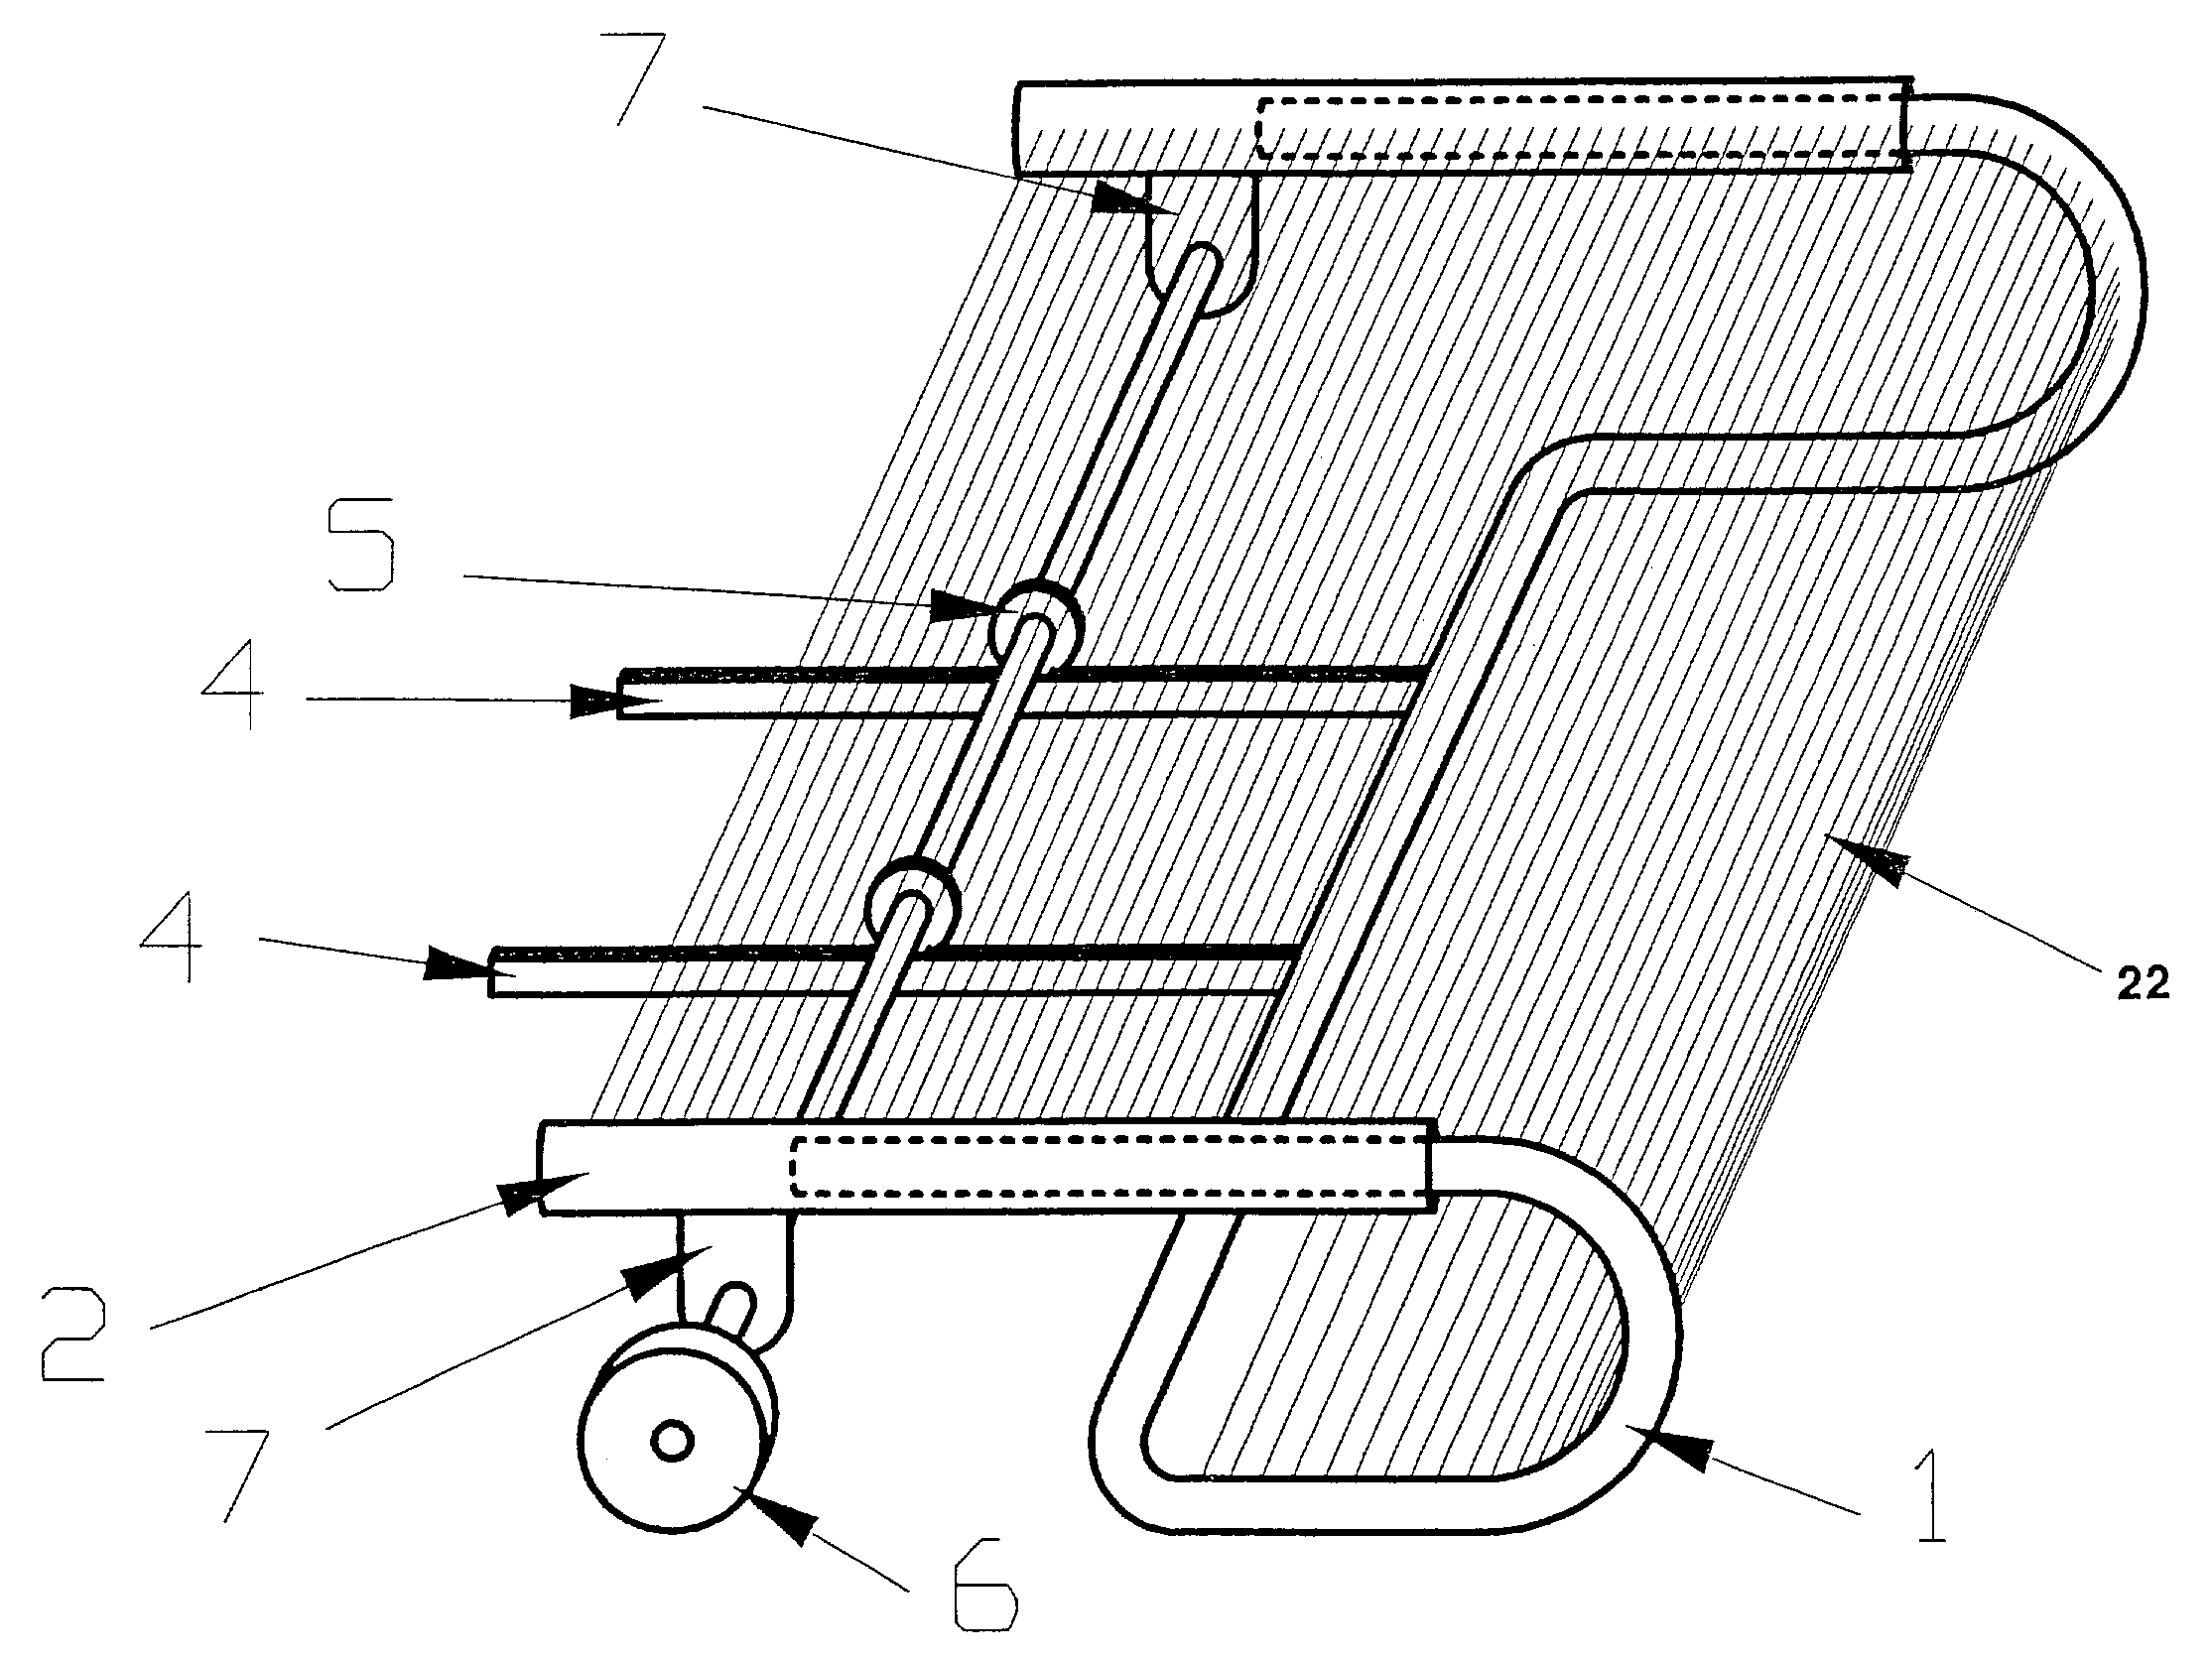 Mechanism for changing a position of a support surface